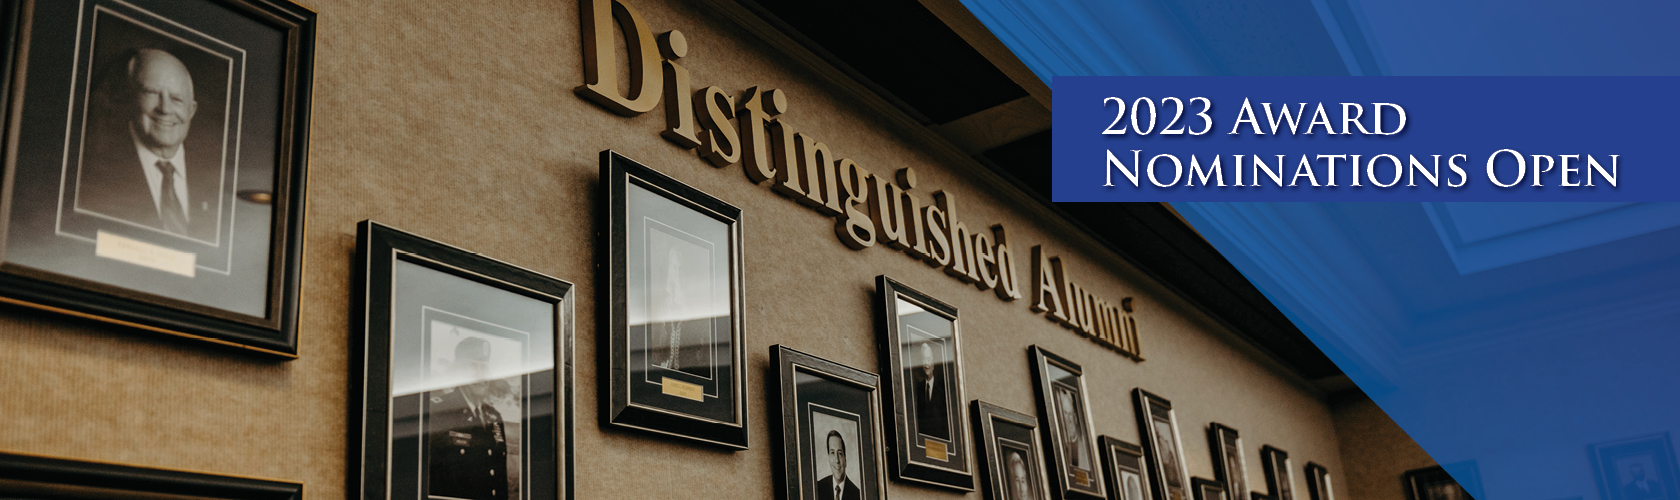 call for nominations distinguished alumni awards 2023